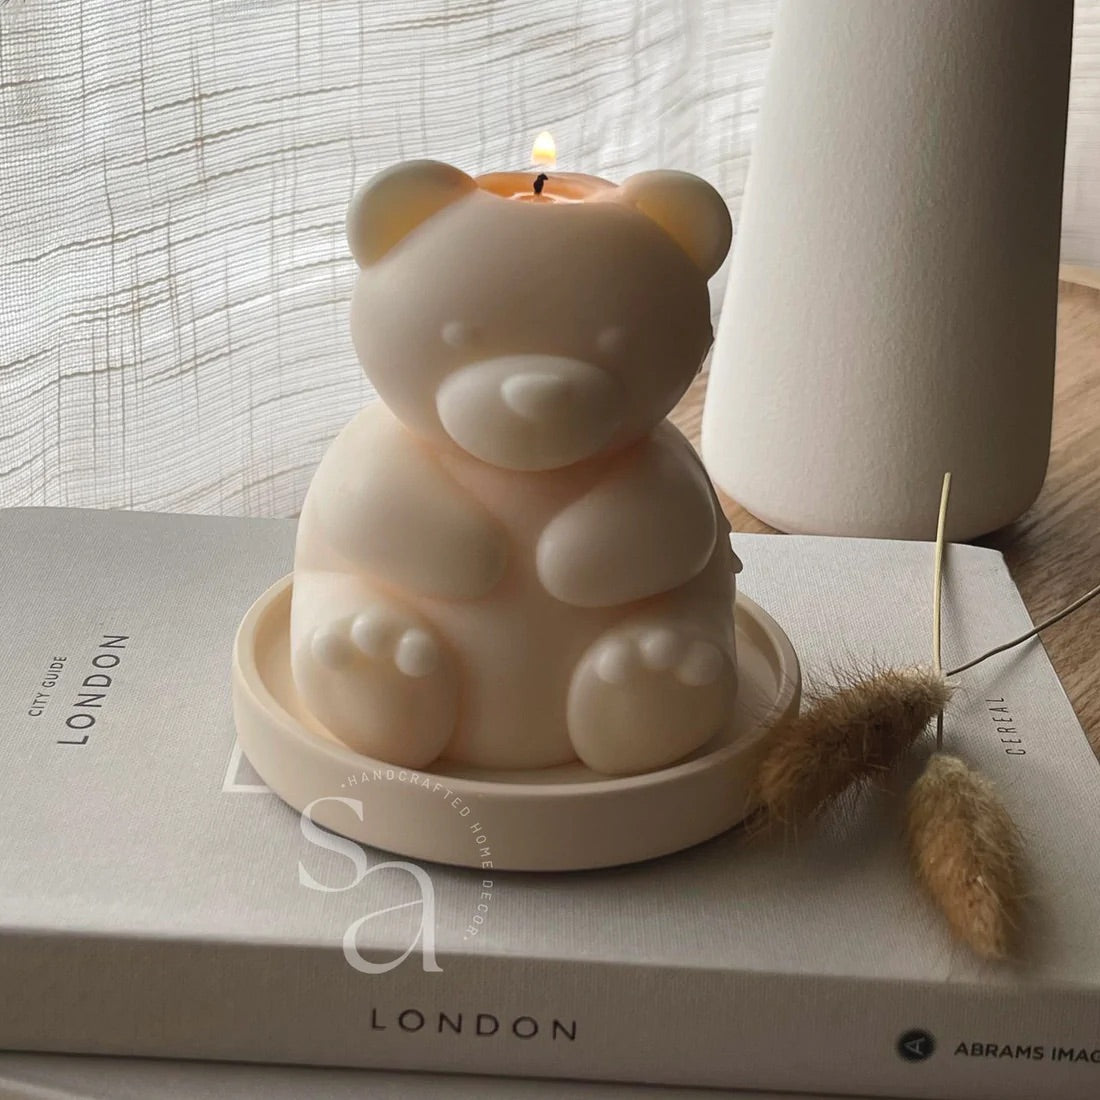 Natural Teddy Bears Candle